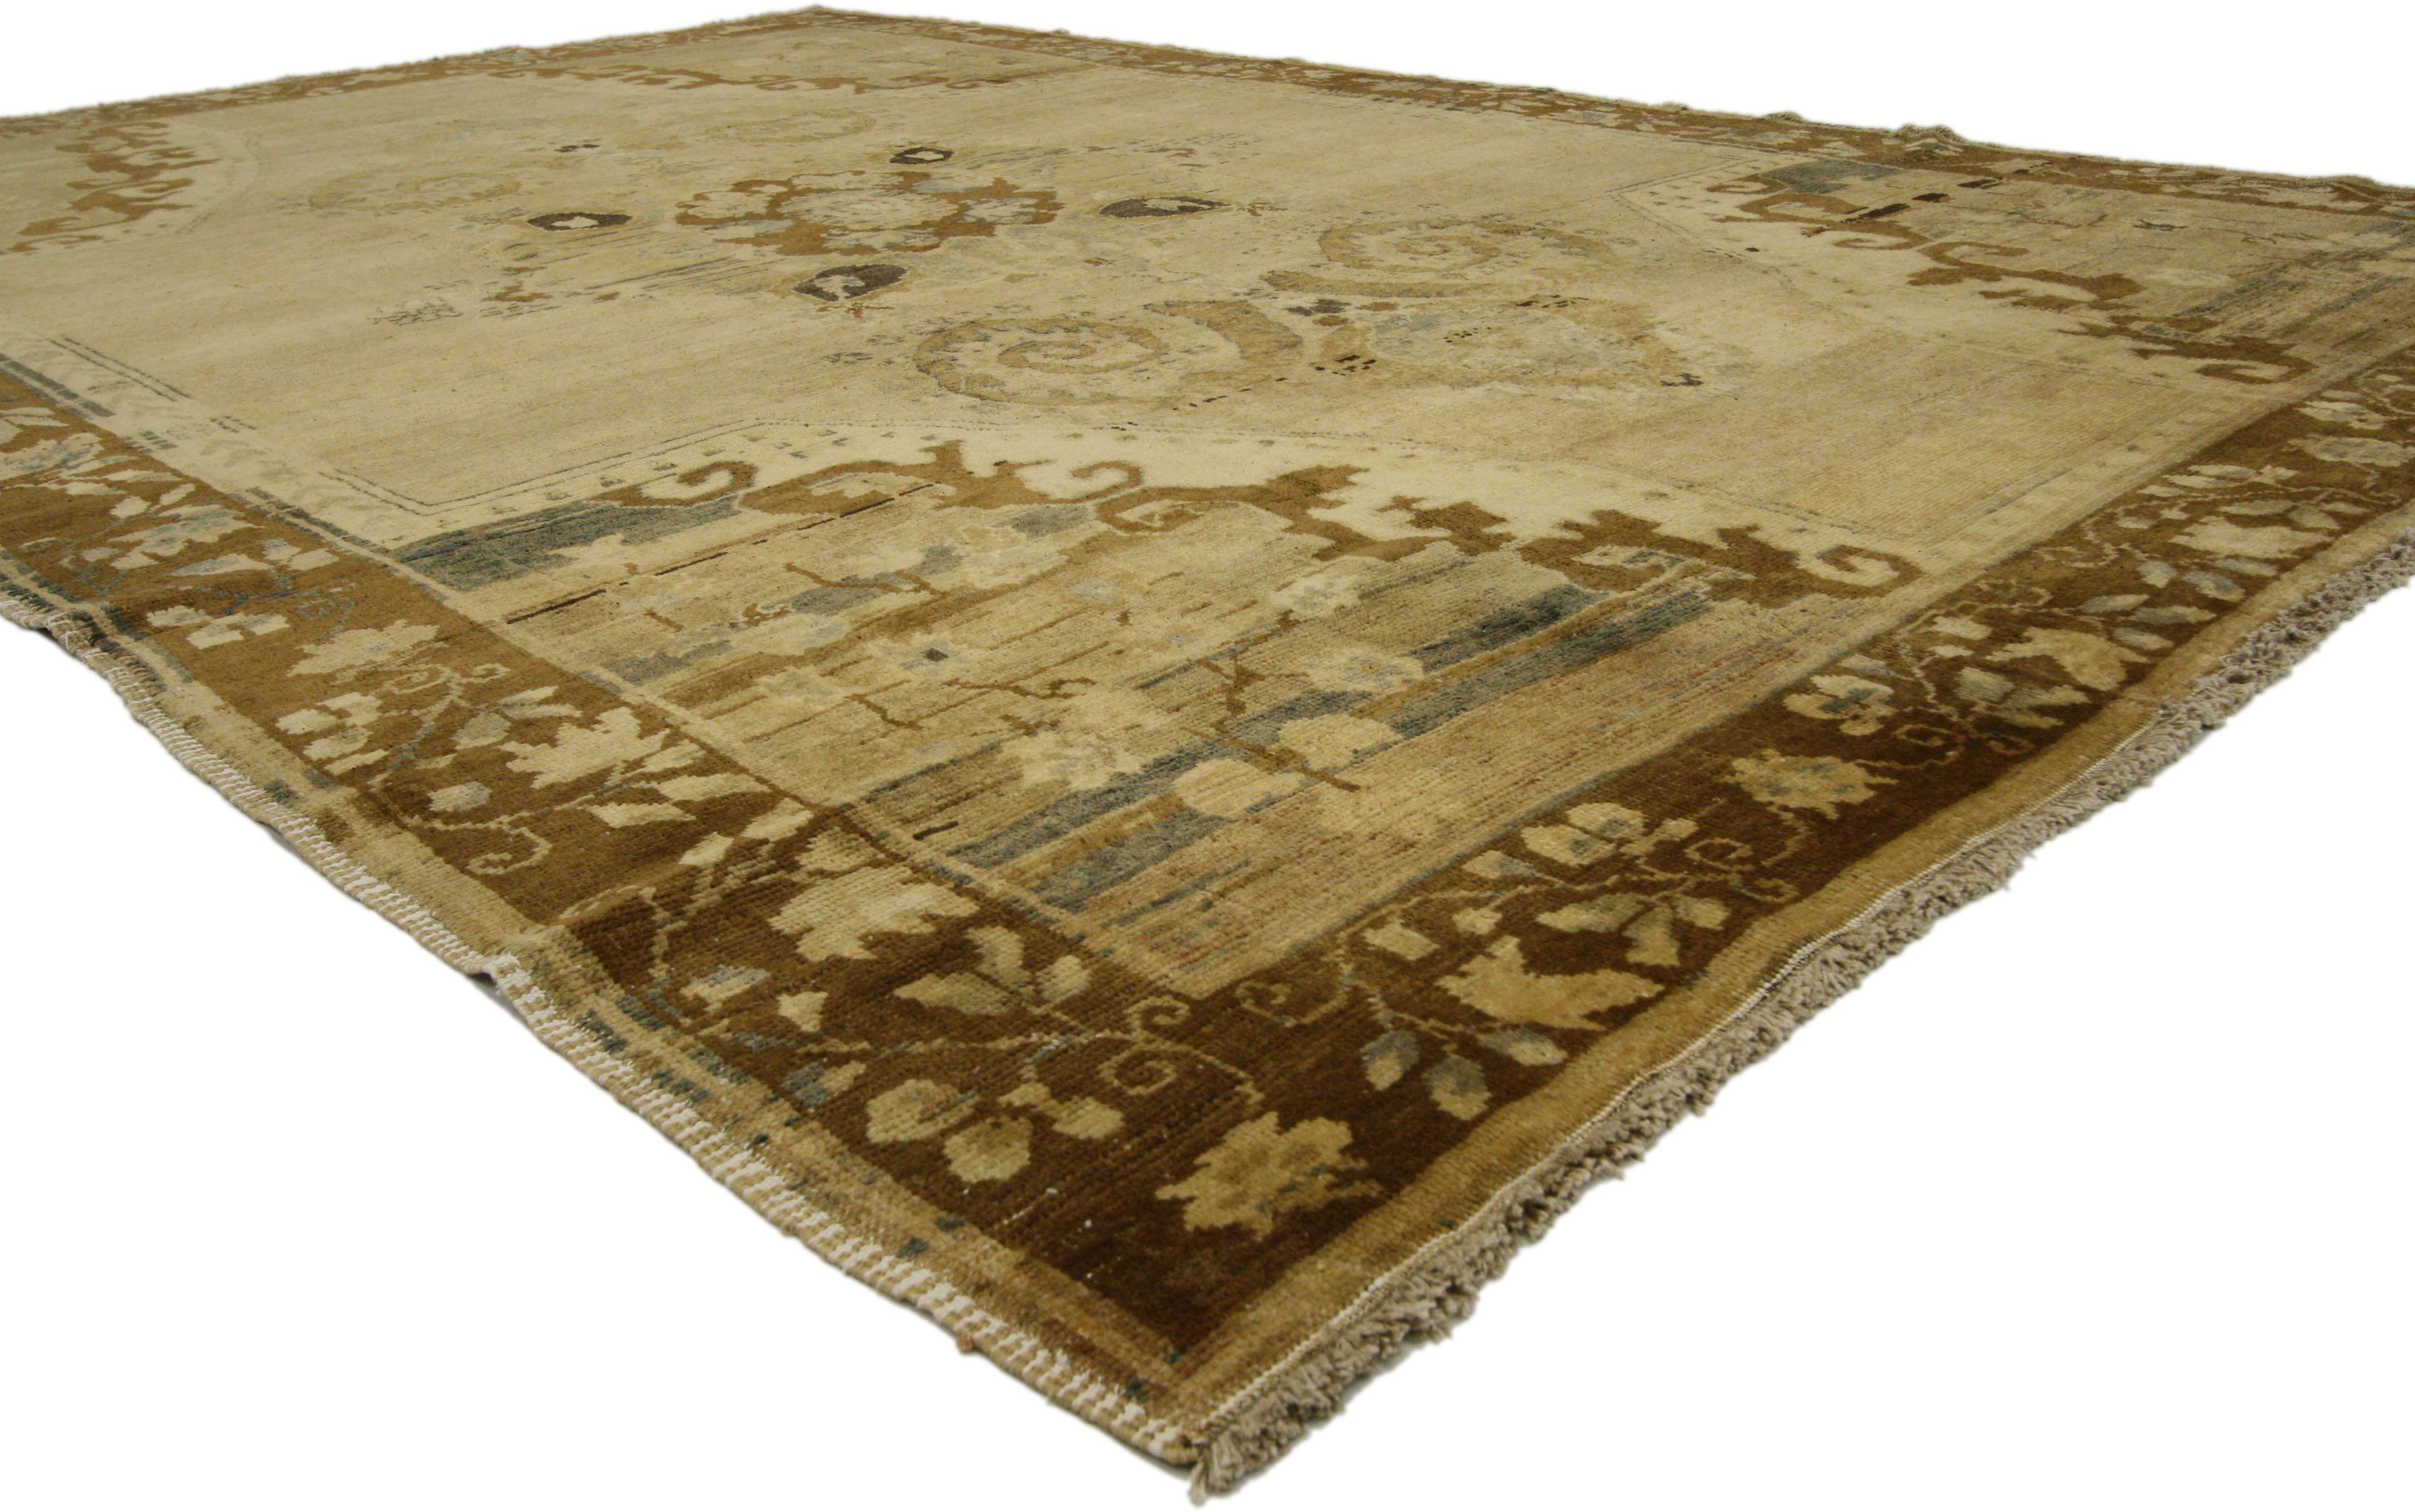 50016 Vintage Turkish Kars Rug with Mid-Century Modern Style 06'08 x 09'11. Characterized by the cozy simplicity of Mid-Century Modern style and effortless beauty, this hand-knotted wool vintage Turkish Kars rug provides a feeling of cozy